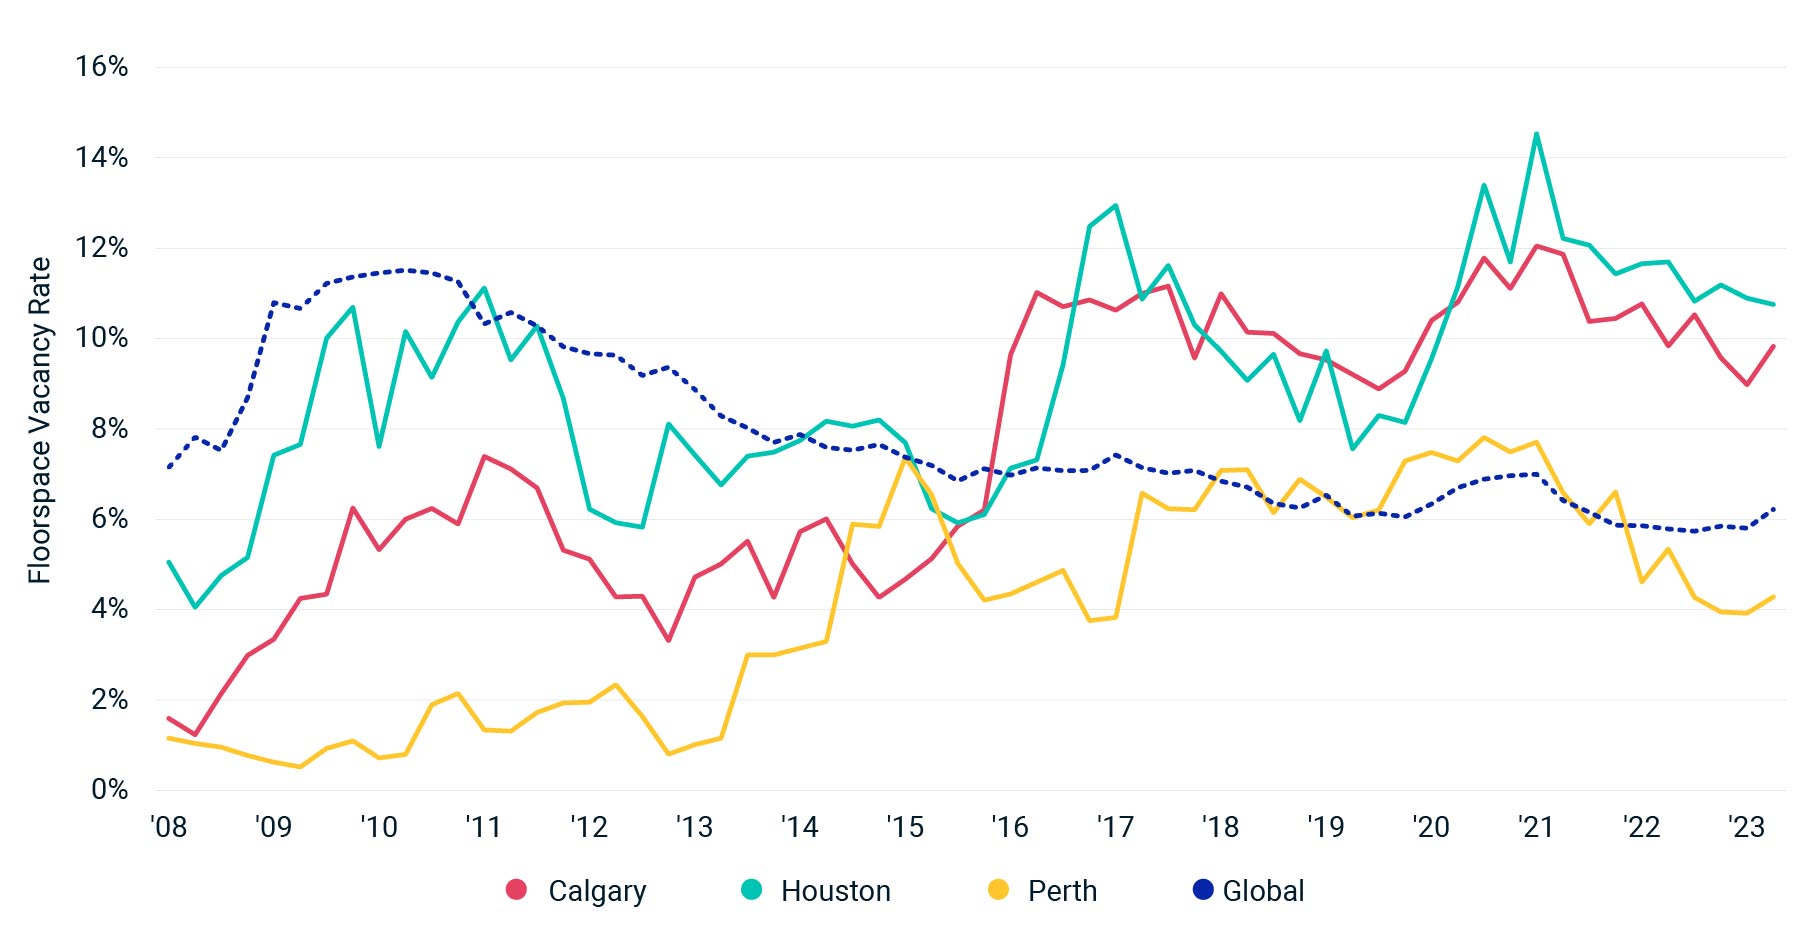 This line graph show the vacancy rates since 2008 for Calgary, Perth and Houston, and the global vacancy rate from the MSCI Global Quarterly Property Index. 